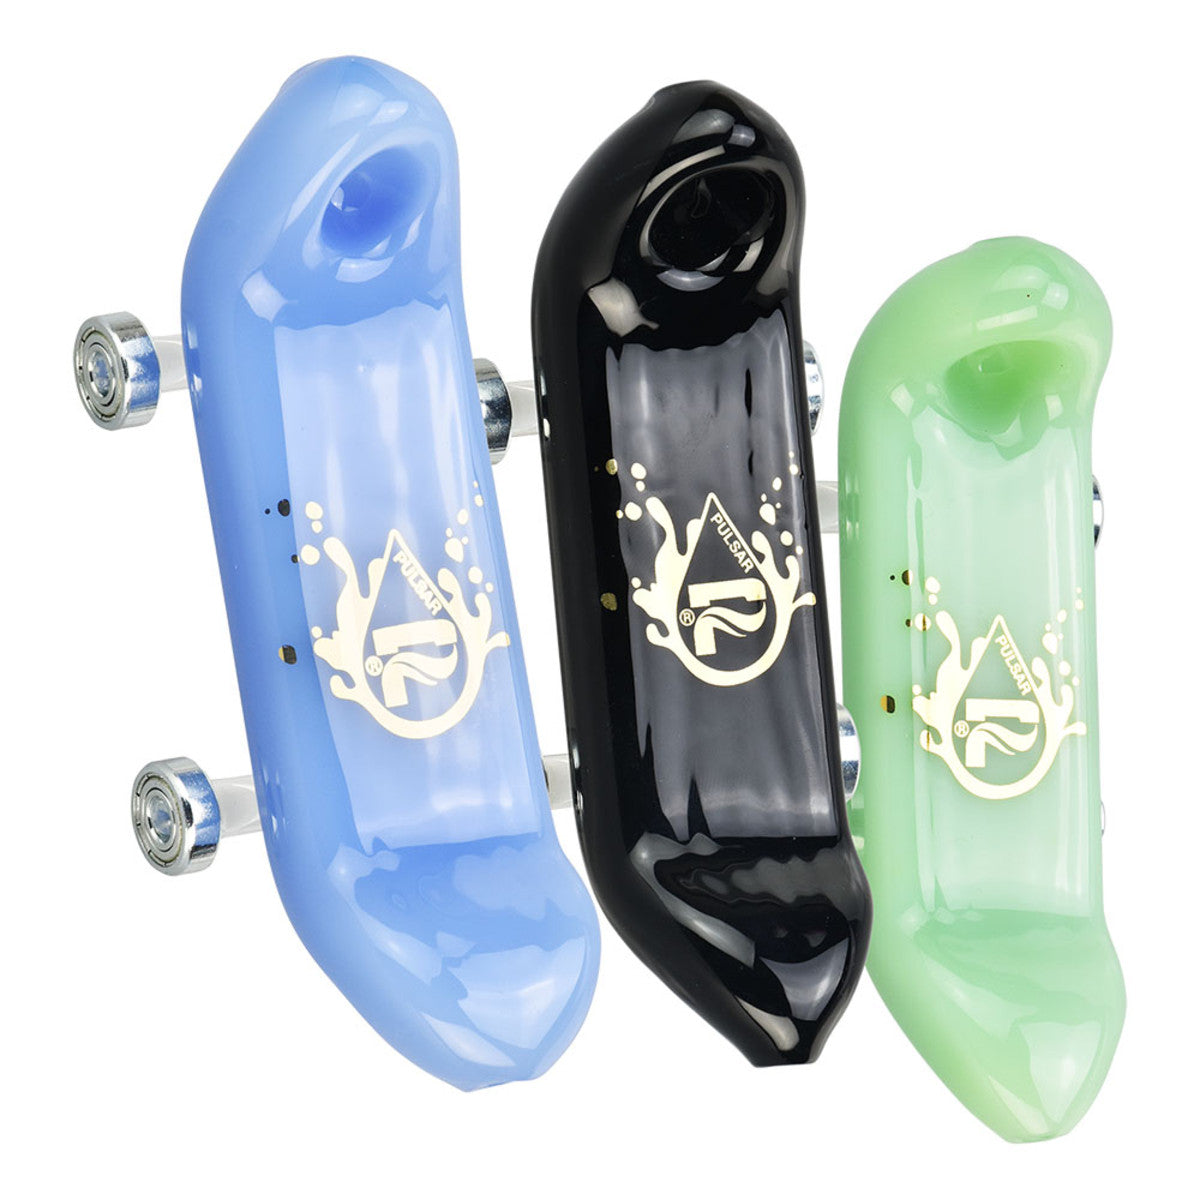 Pulsar Rolling Skateboard Hand Pipes in assorted colors with novelty design, top view